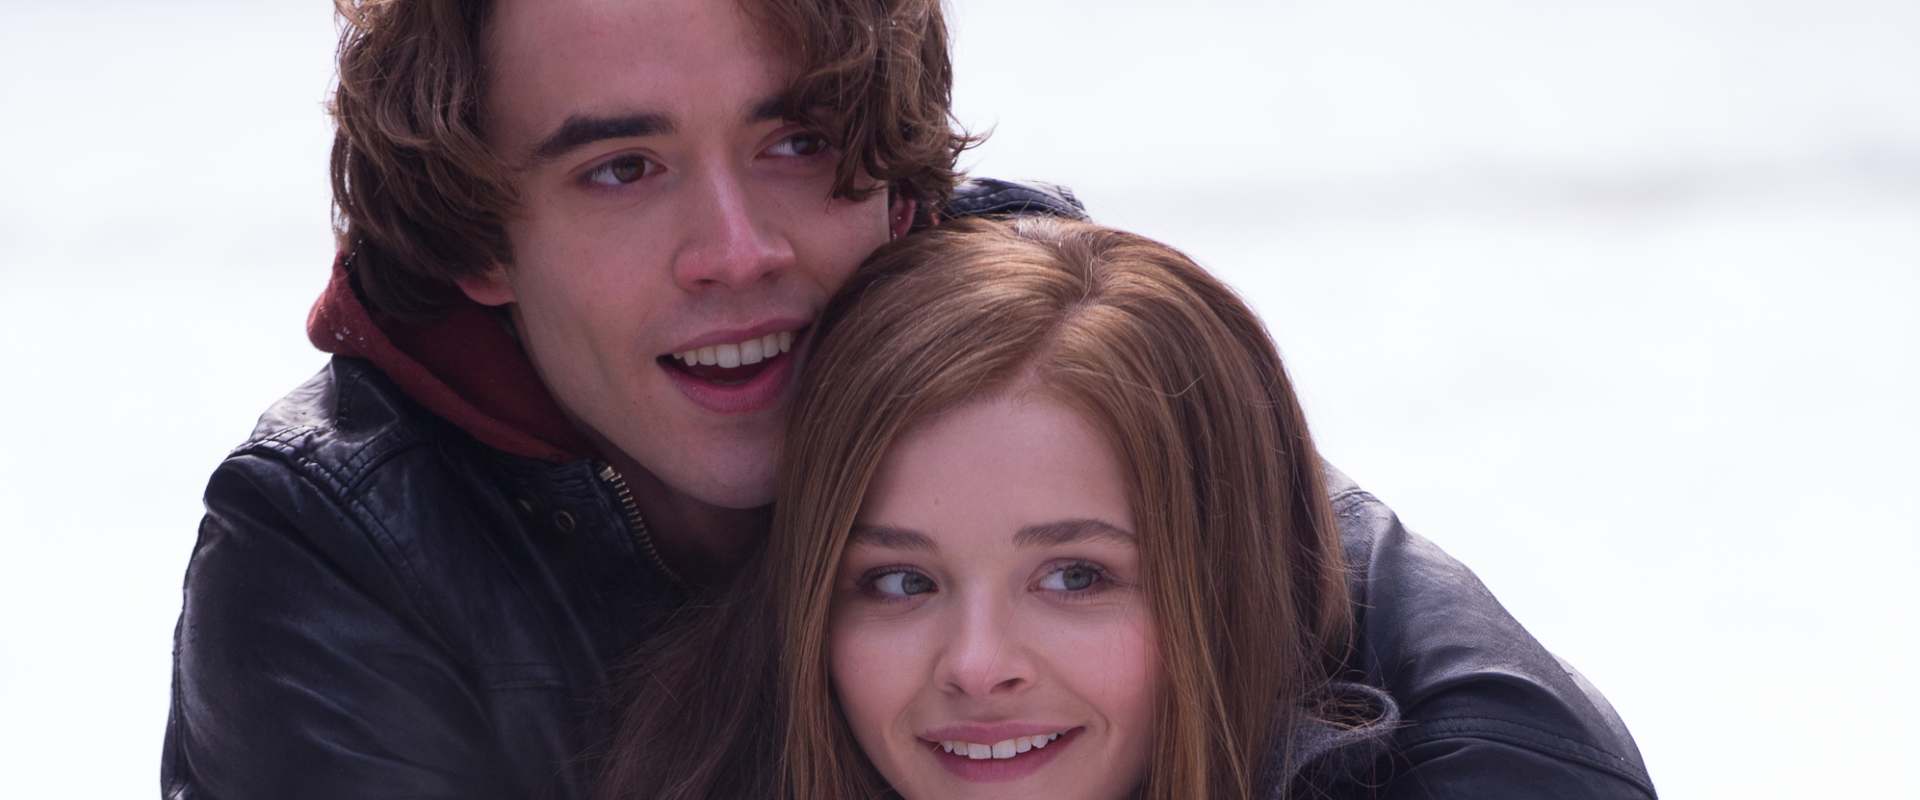 If I Stay background 1